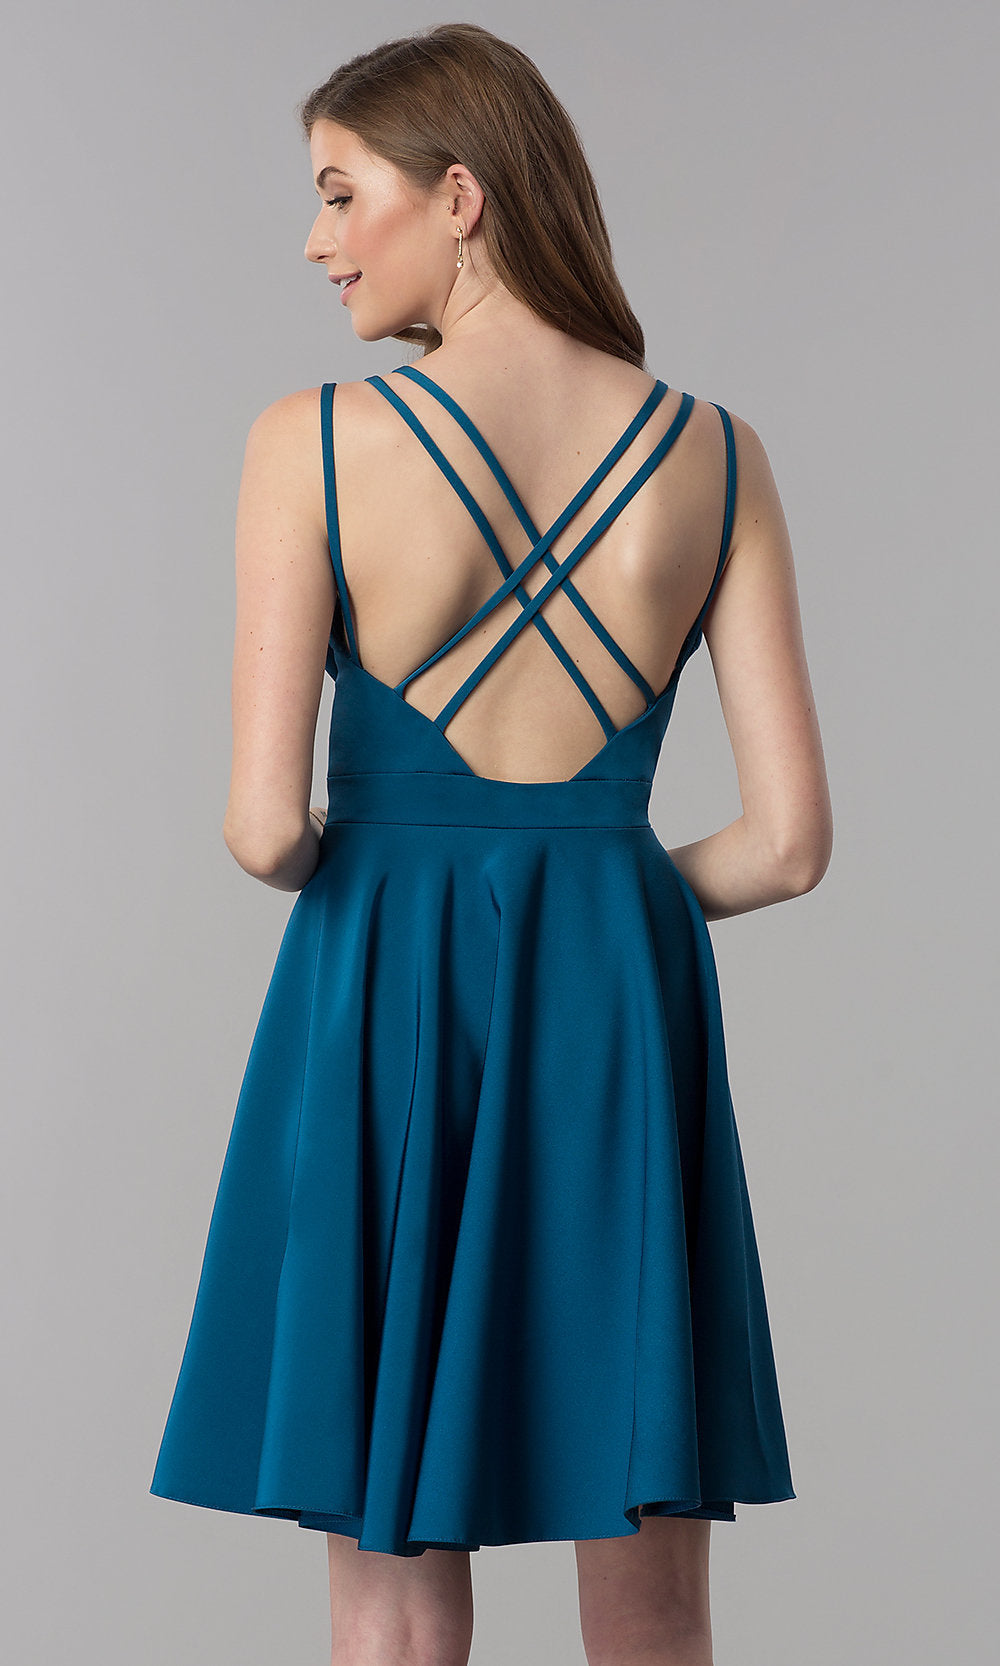  Triple-Strap Short Teal Blue Homecoming Party Dress